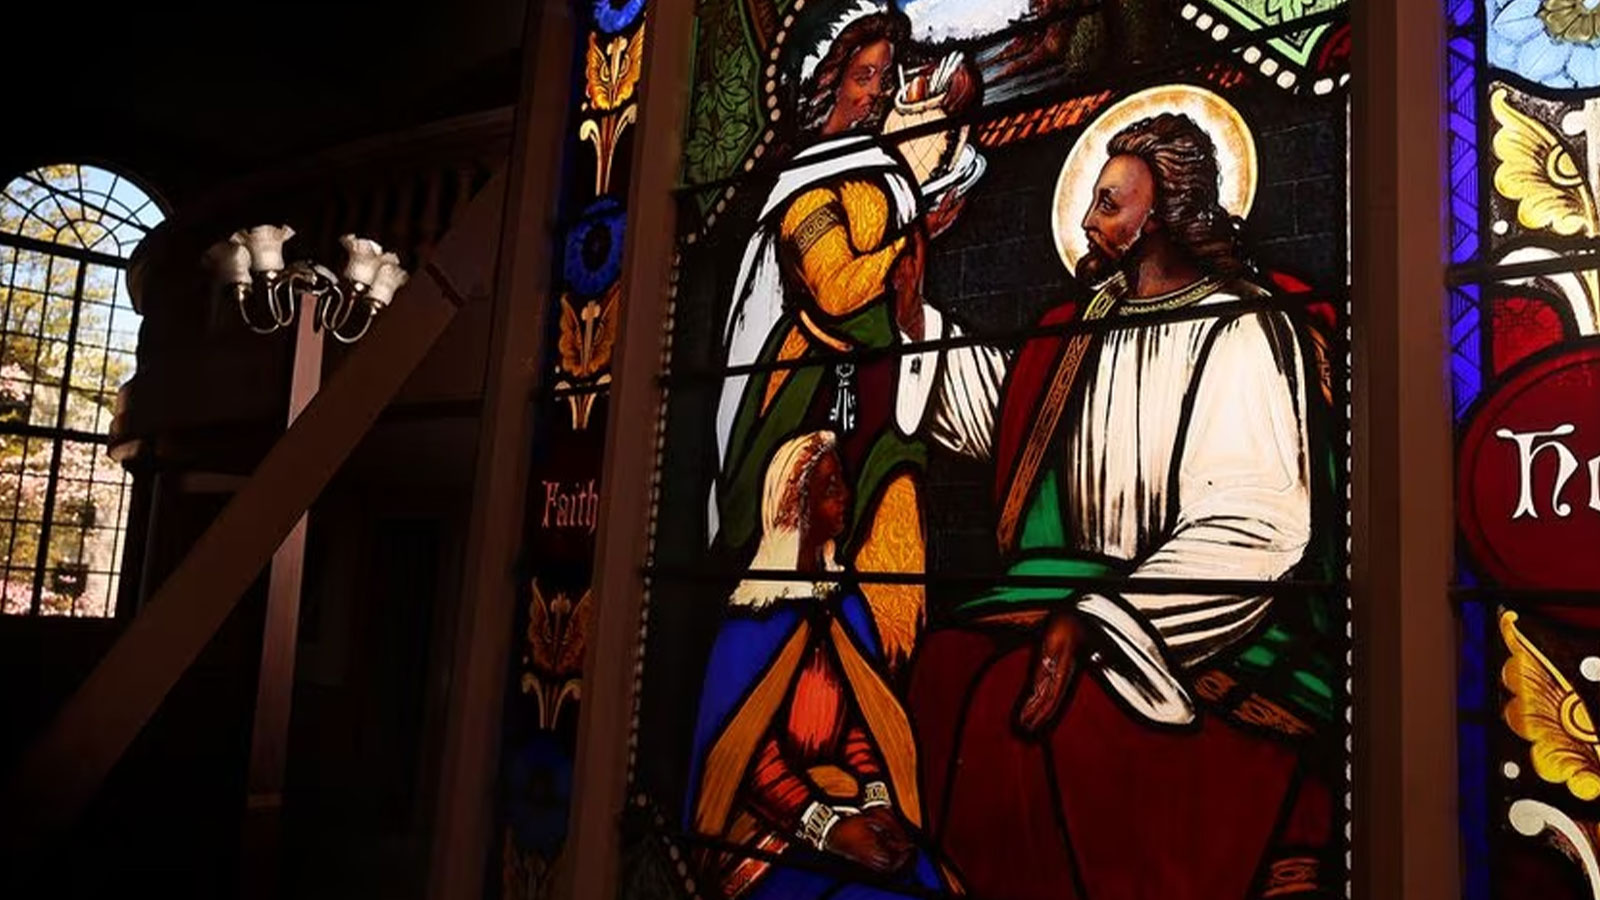 In Rhode Island, a stained-glass window shows Christ as a man of color